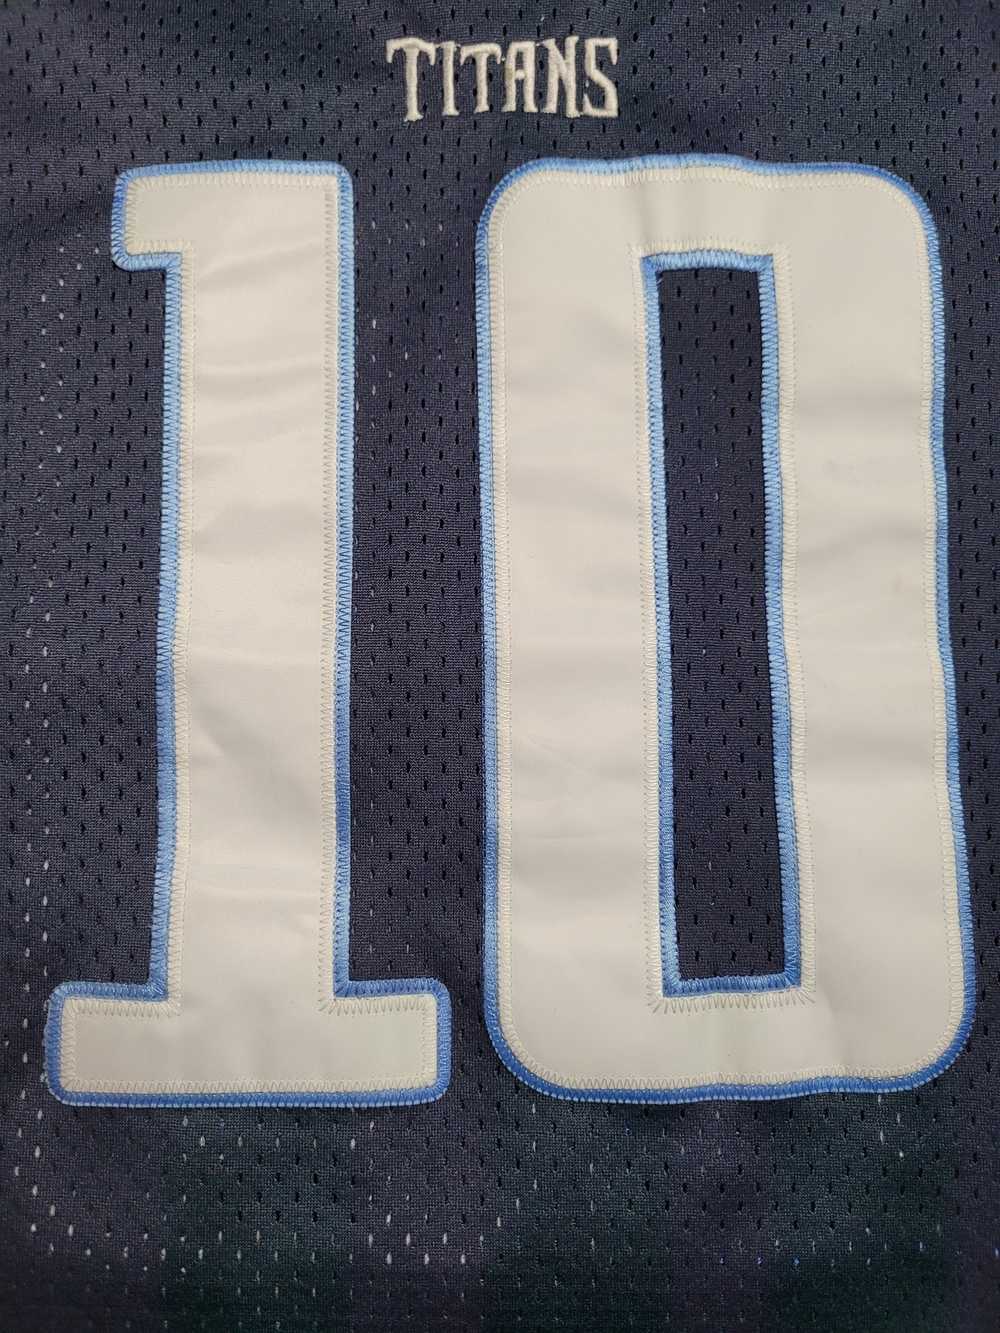 Reebok Authentic NFL Vince Young Rookie Jersey - image 2